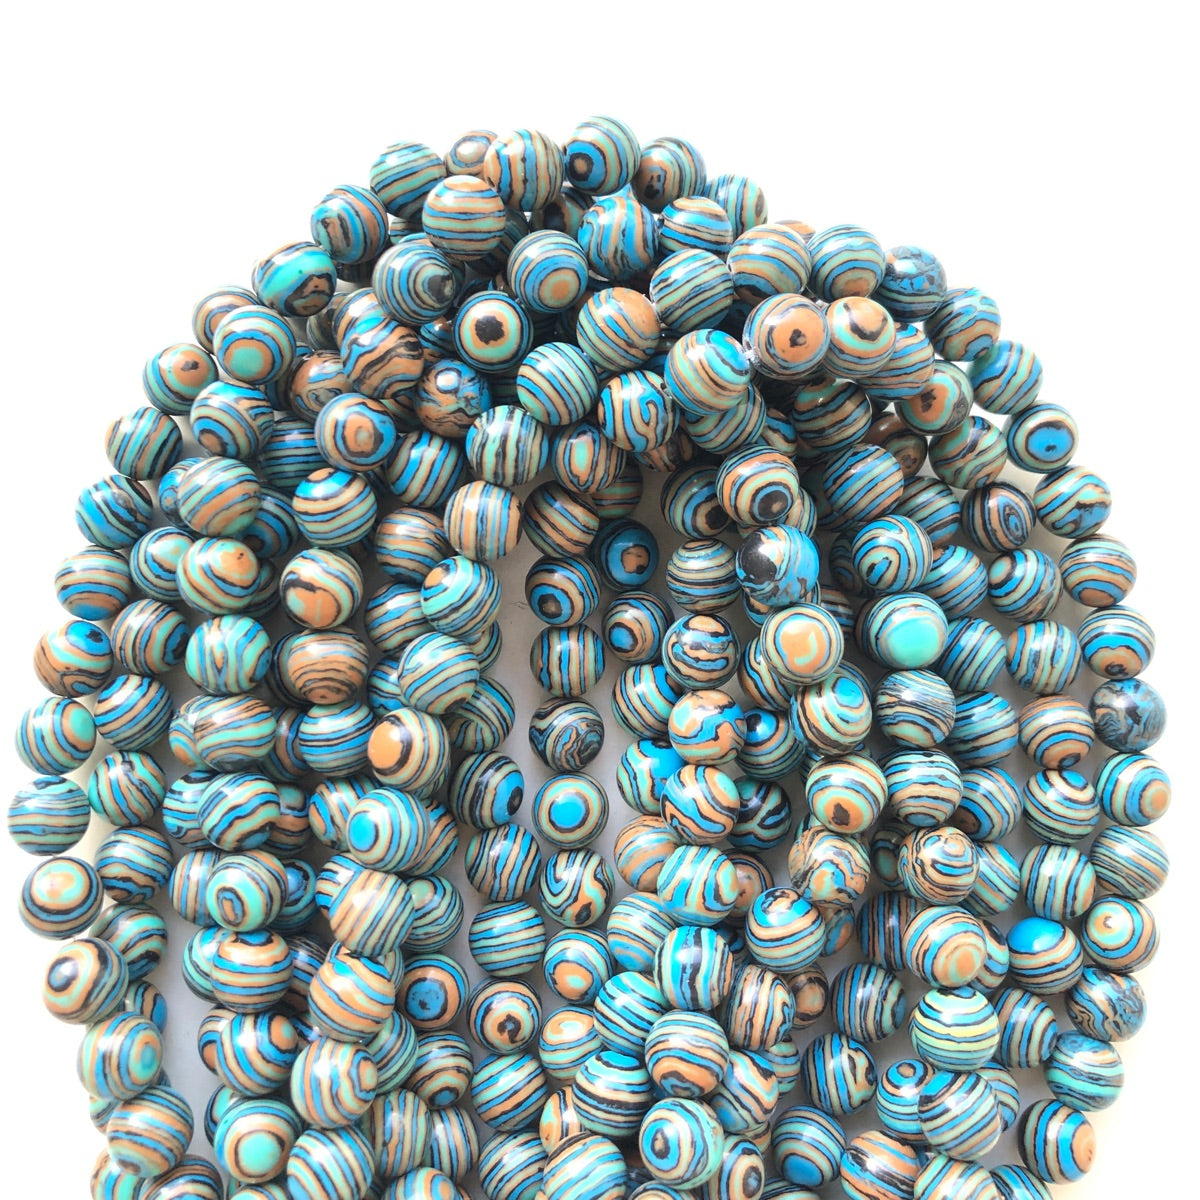 2 Strands/lot 10mm Colorful Malachite Round Beads-9 Colors Blue Stone Beads New Beads Arrivals Other Stone Beads Charms Beads Beyond